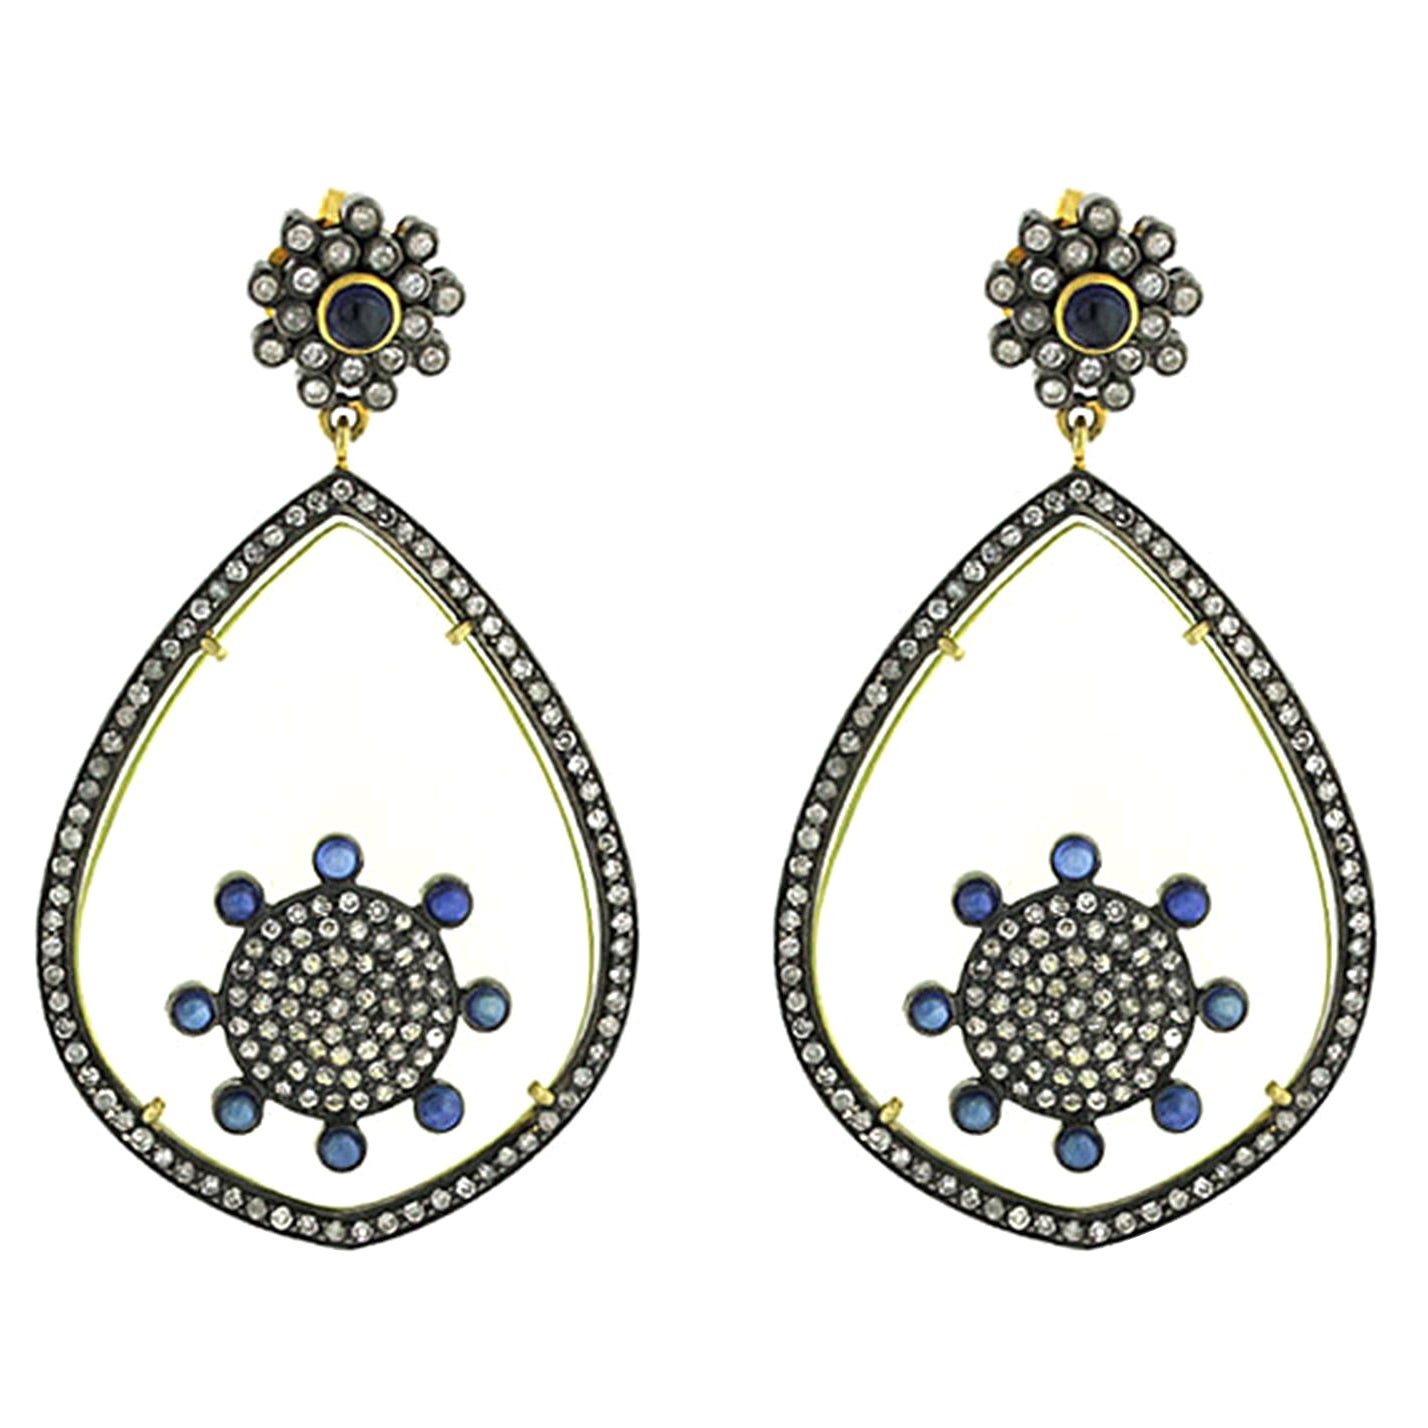 Pear Shaped Quartz & Sapphire Earrings with Pave Diamonds in 18k Gold & Silver